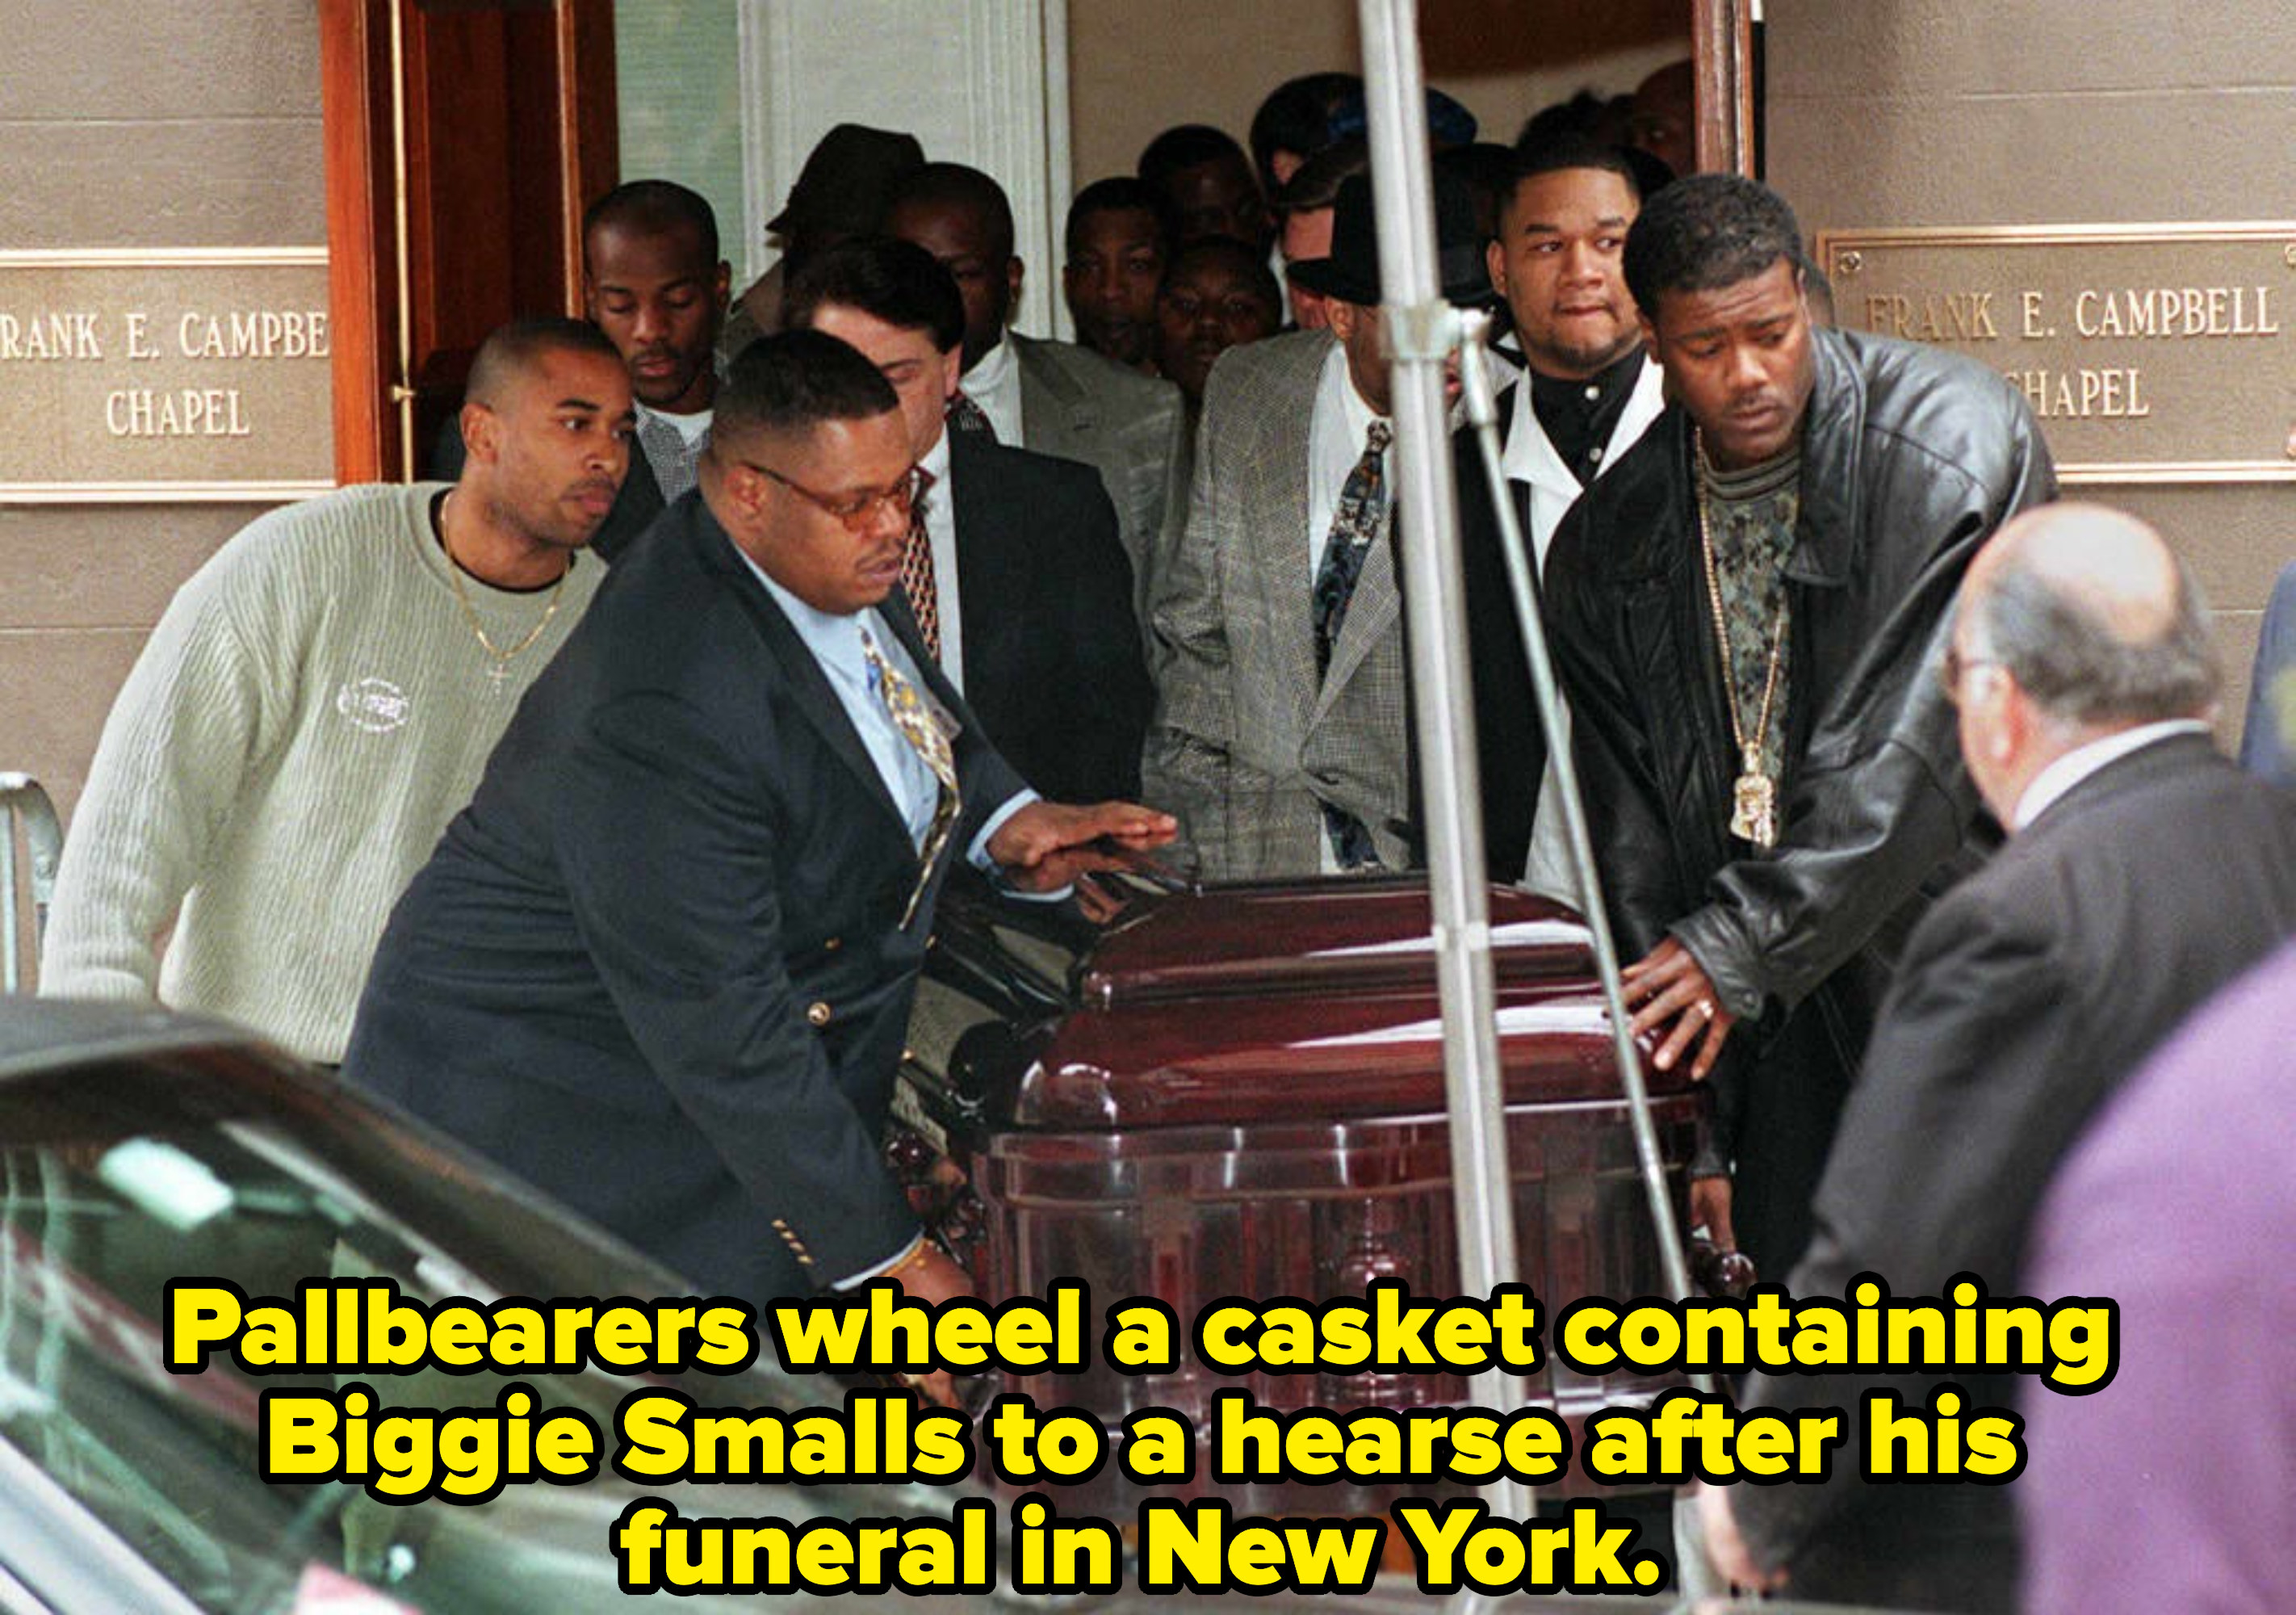 Pallbearers wheel casket containing rap star Biggie Smalls to hearse after funeral 18 March in New York